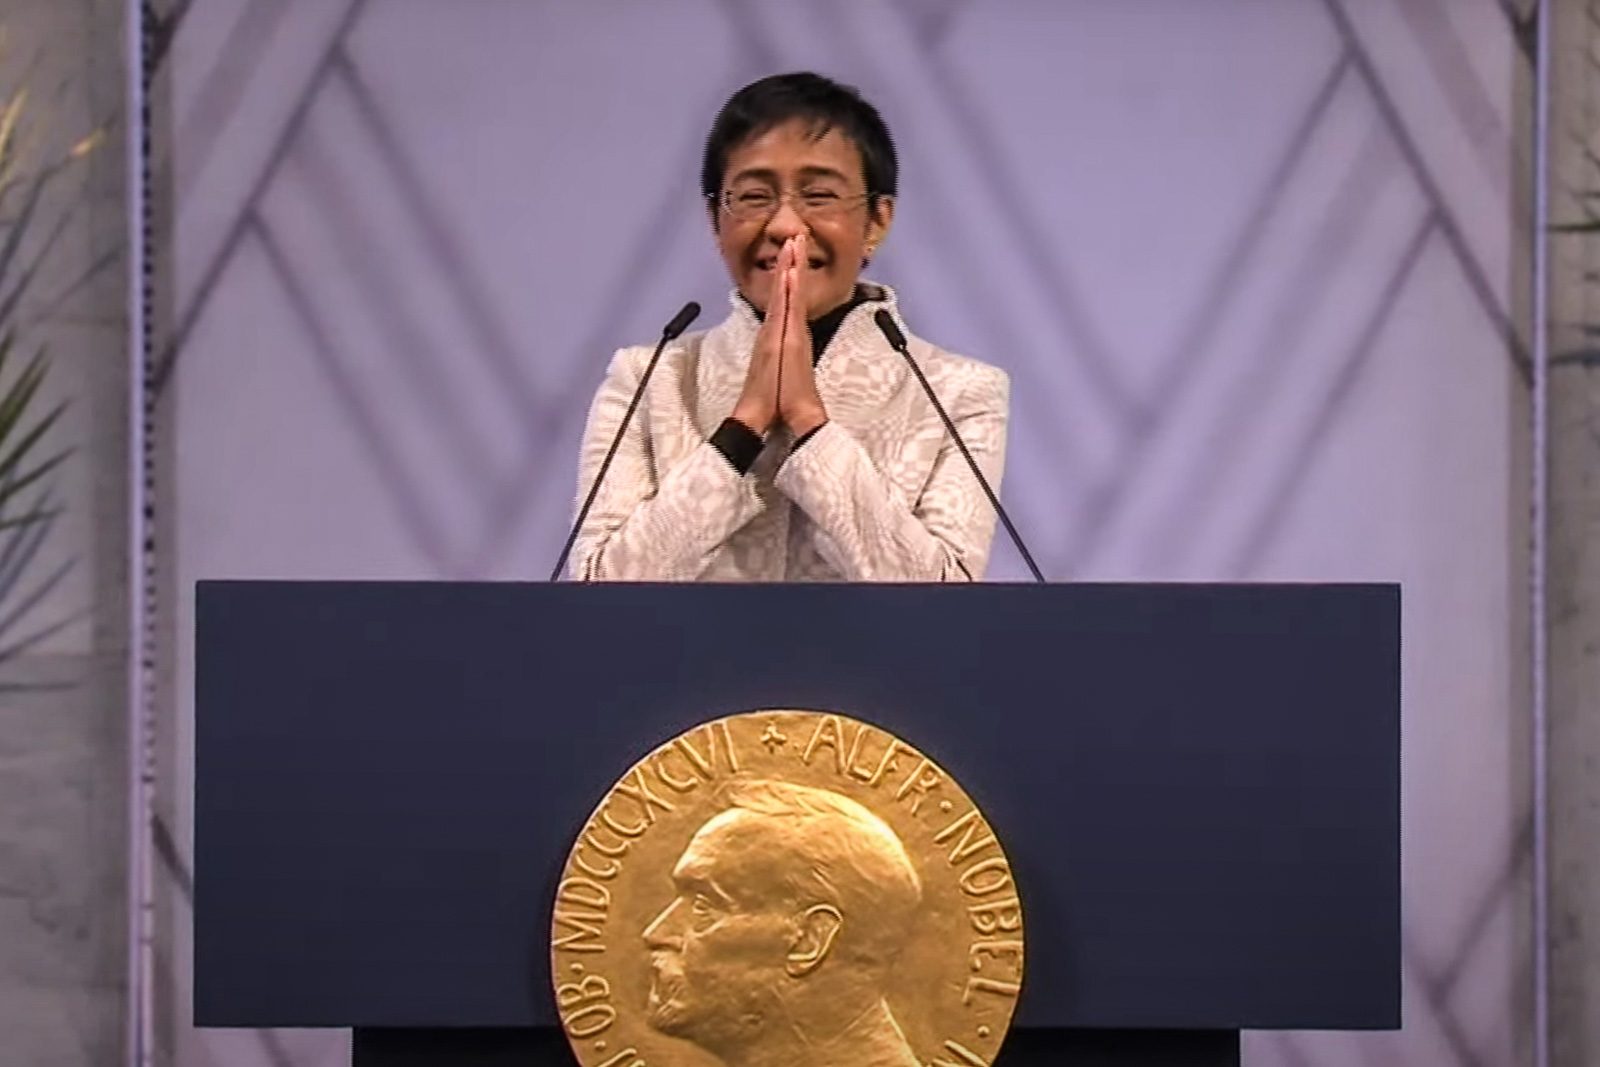 Robredo on Maria Ressa’s Nobel prize: ‘Courage in service of others’